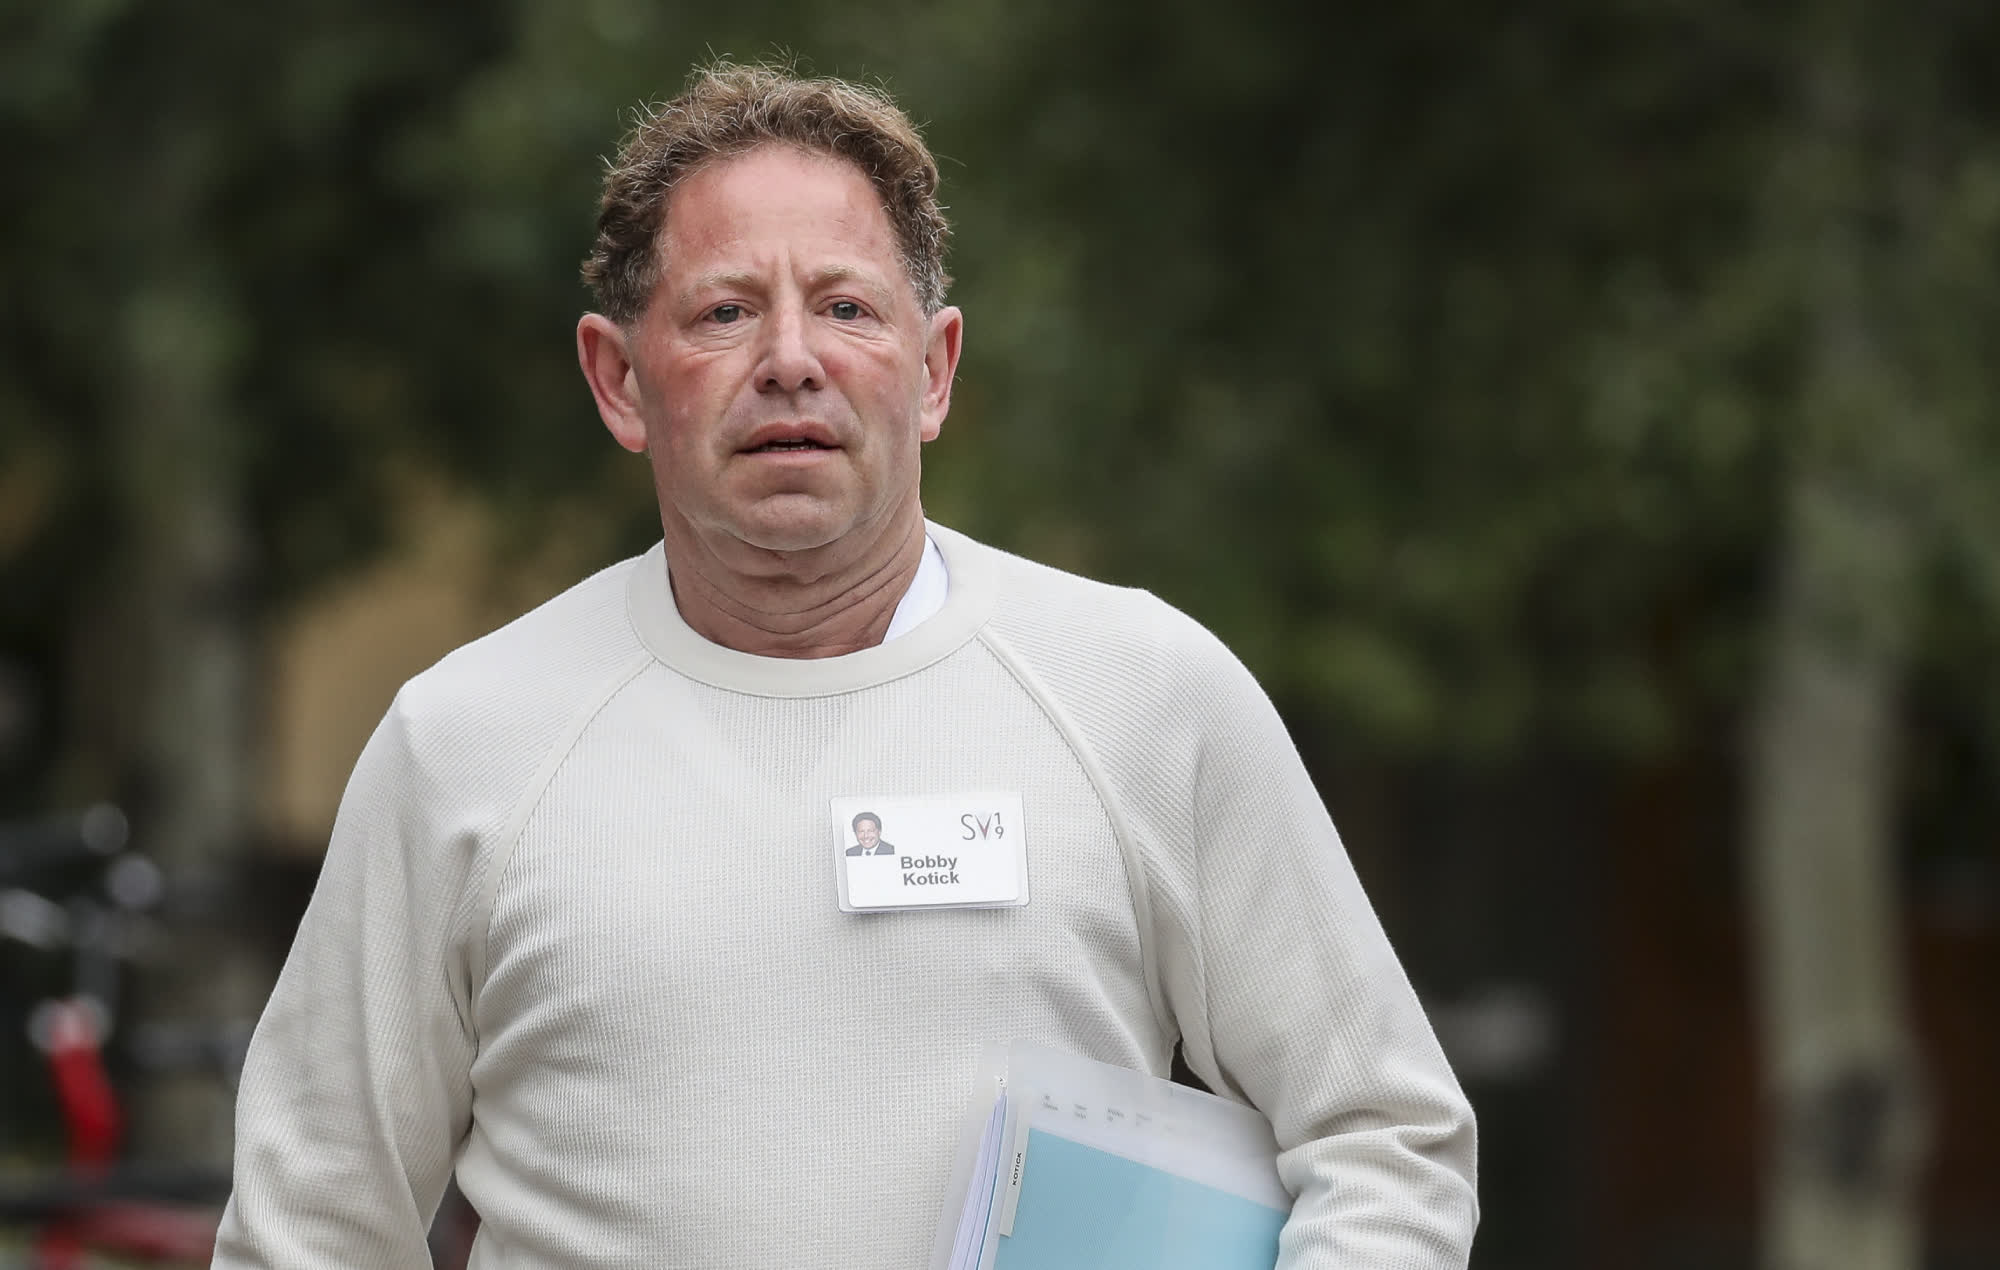 Activision CEO Bobby Kotick allegedly failed to inform the company board about rape allegations